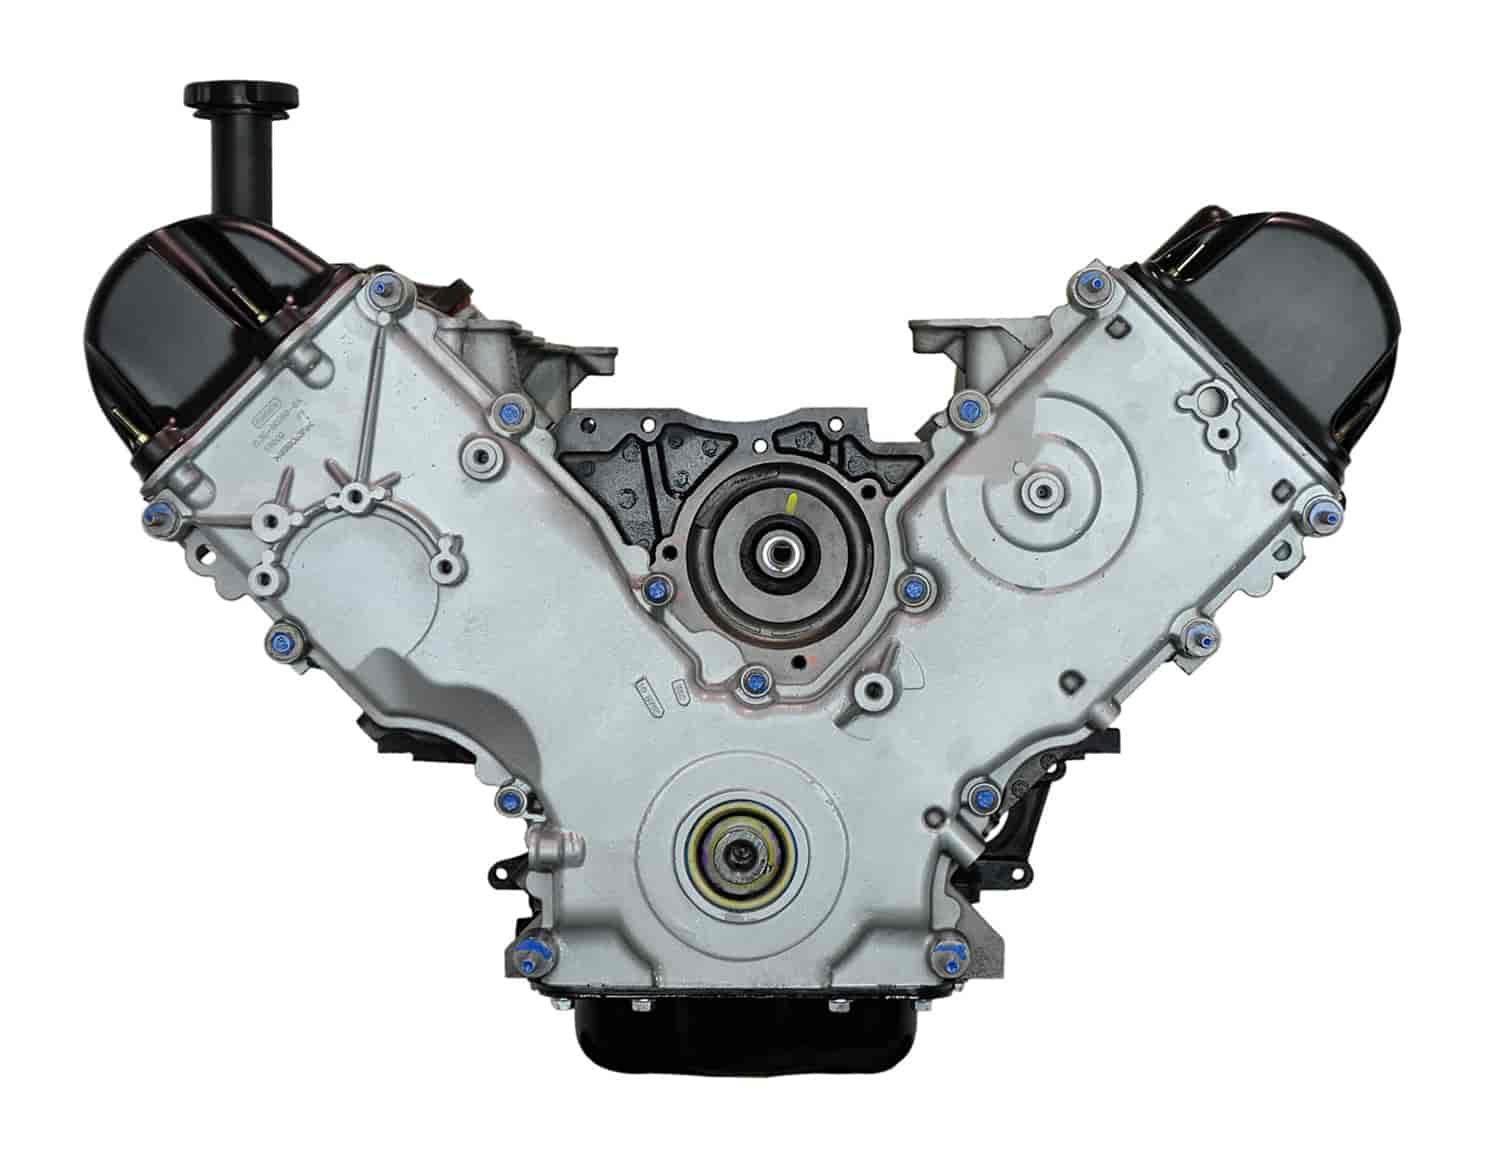 Remanufactured Crate Engine for 2002-2003 Ford F-150 &